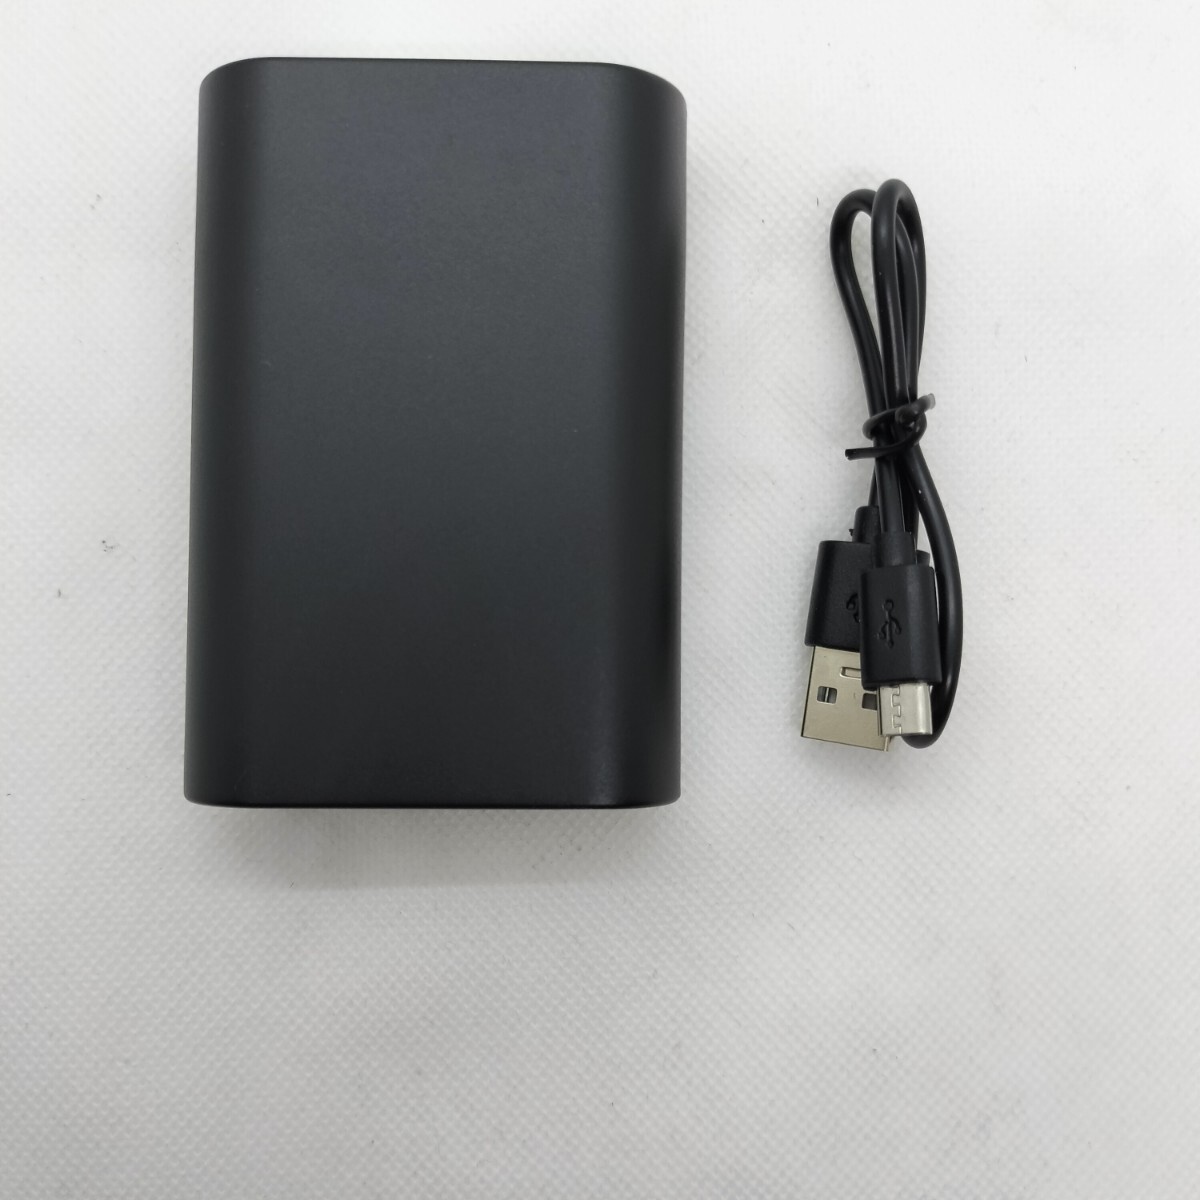  mobile battery 13800mah output 5V-2.0A light weight * compact *iPhone all sorts smart phone and so on correspondence #0350